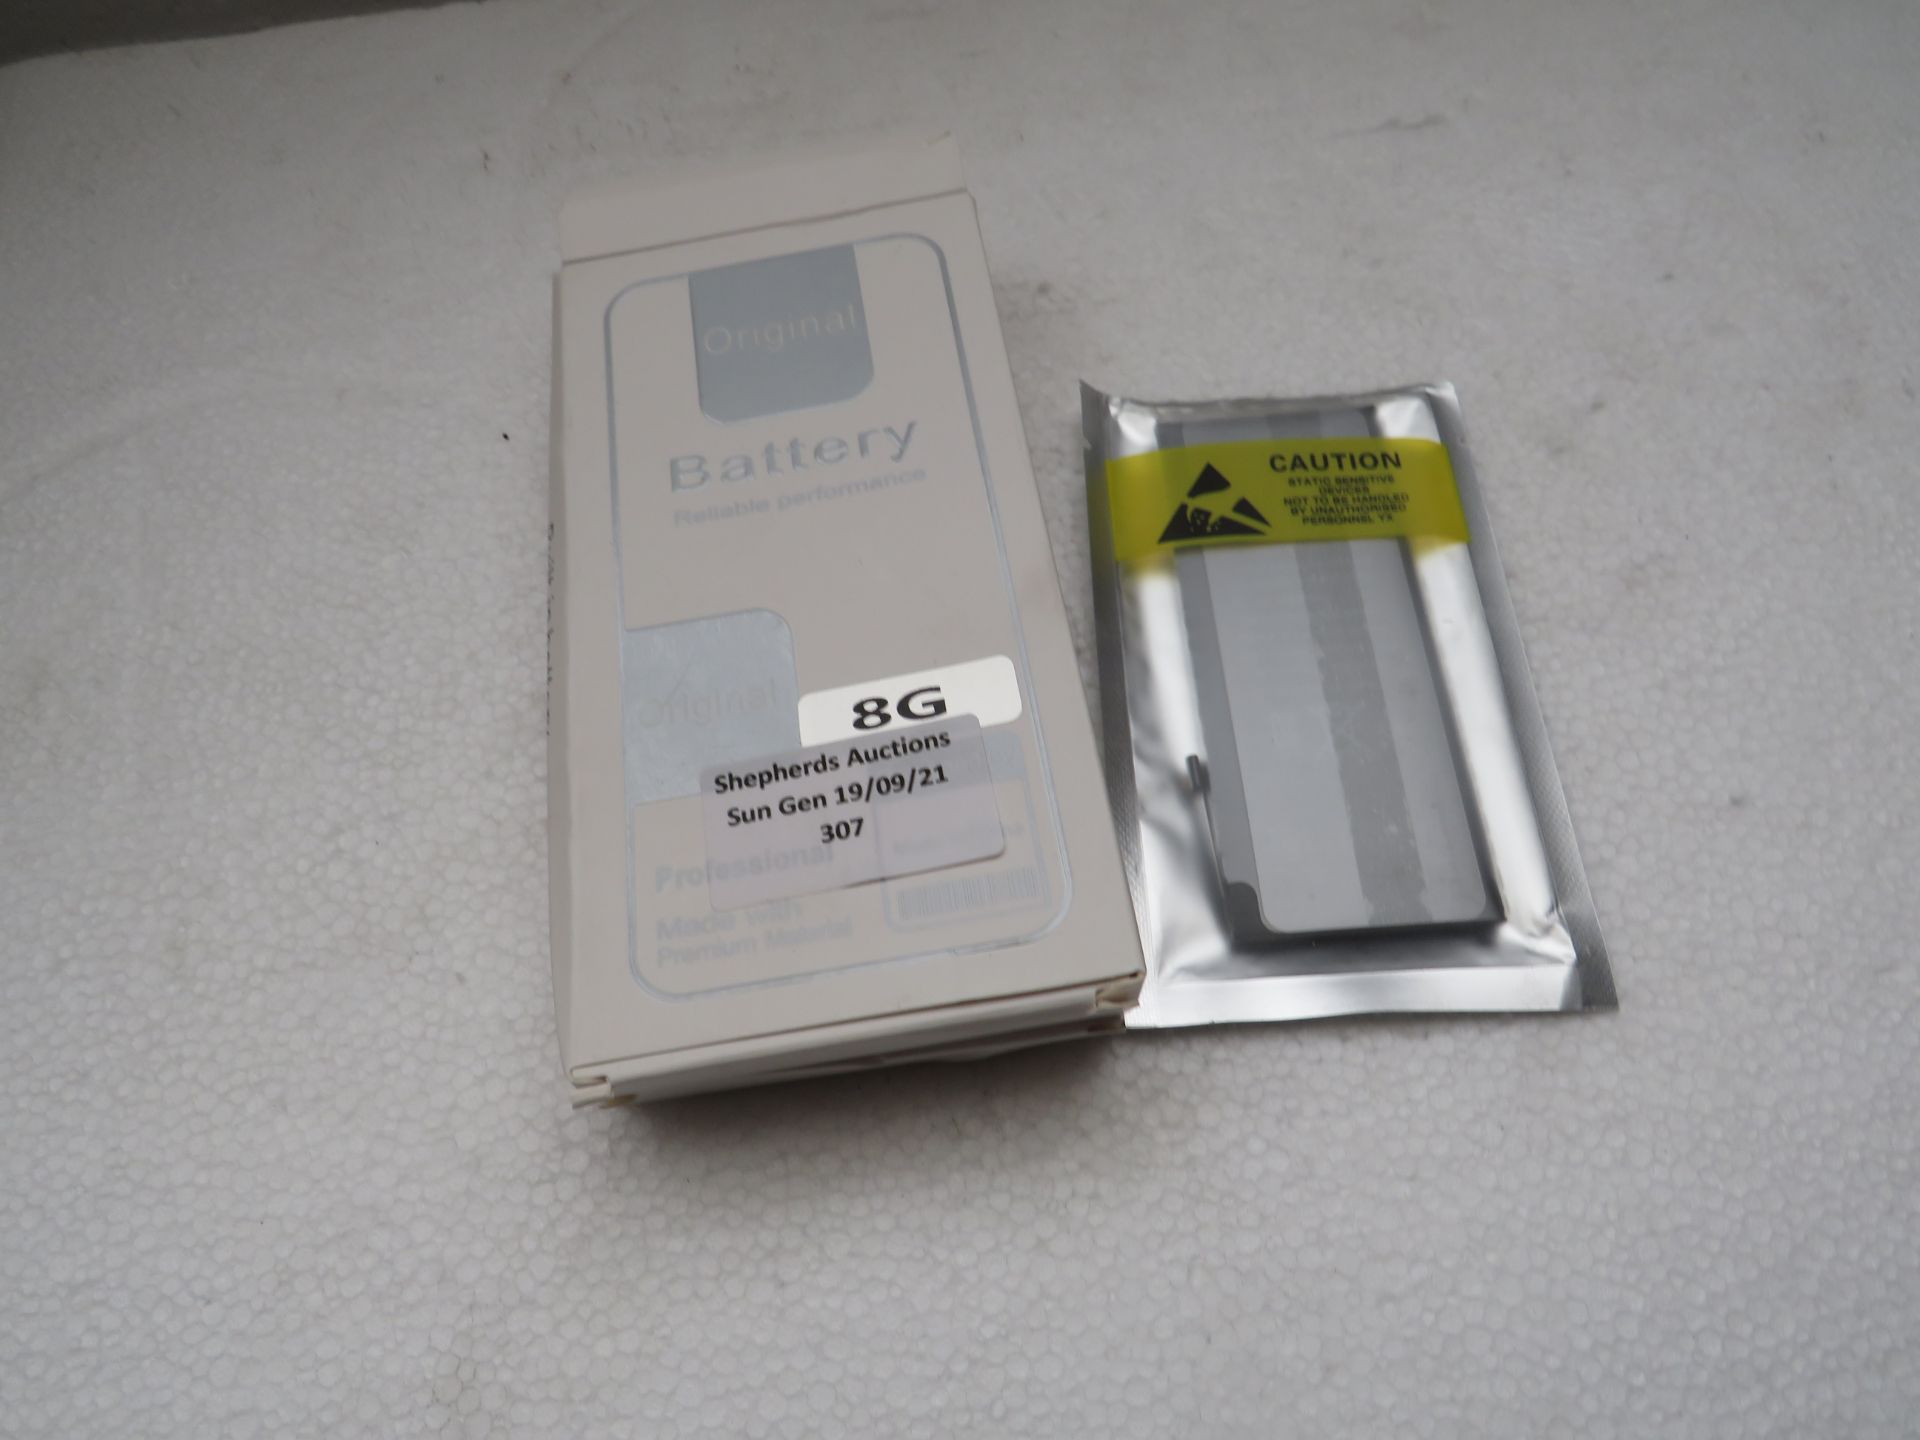 2x Battery replacement pack, new and boxed.